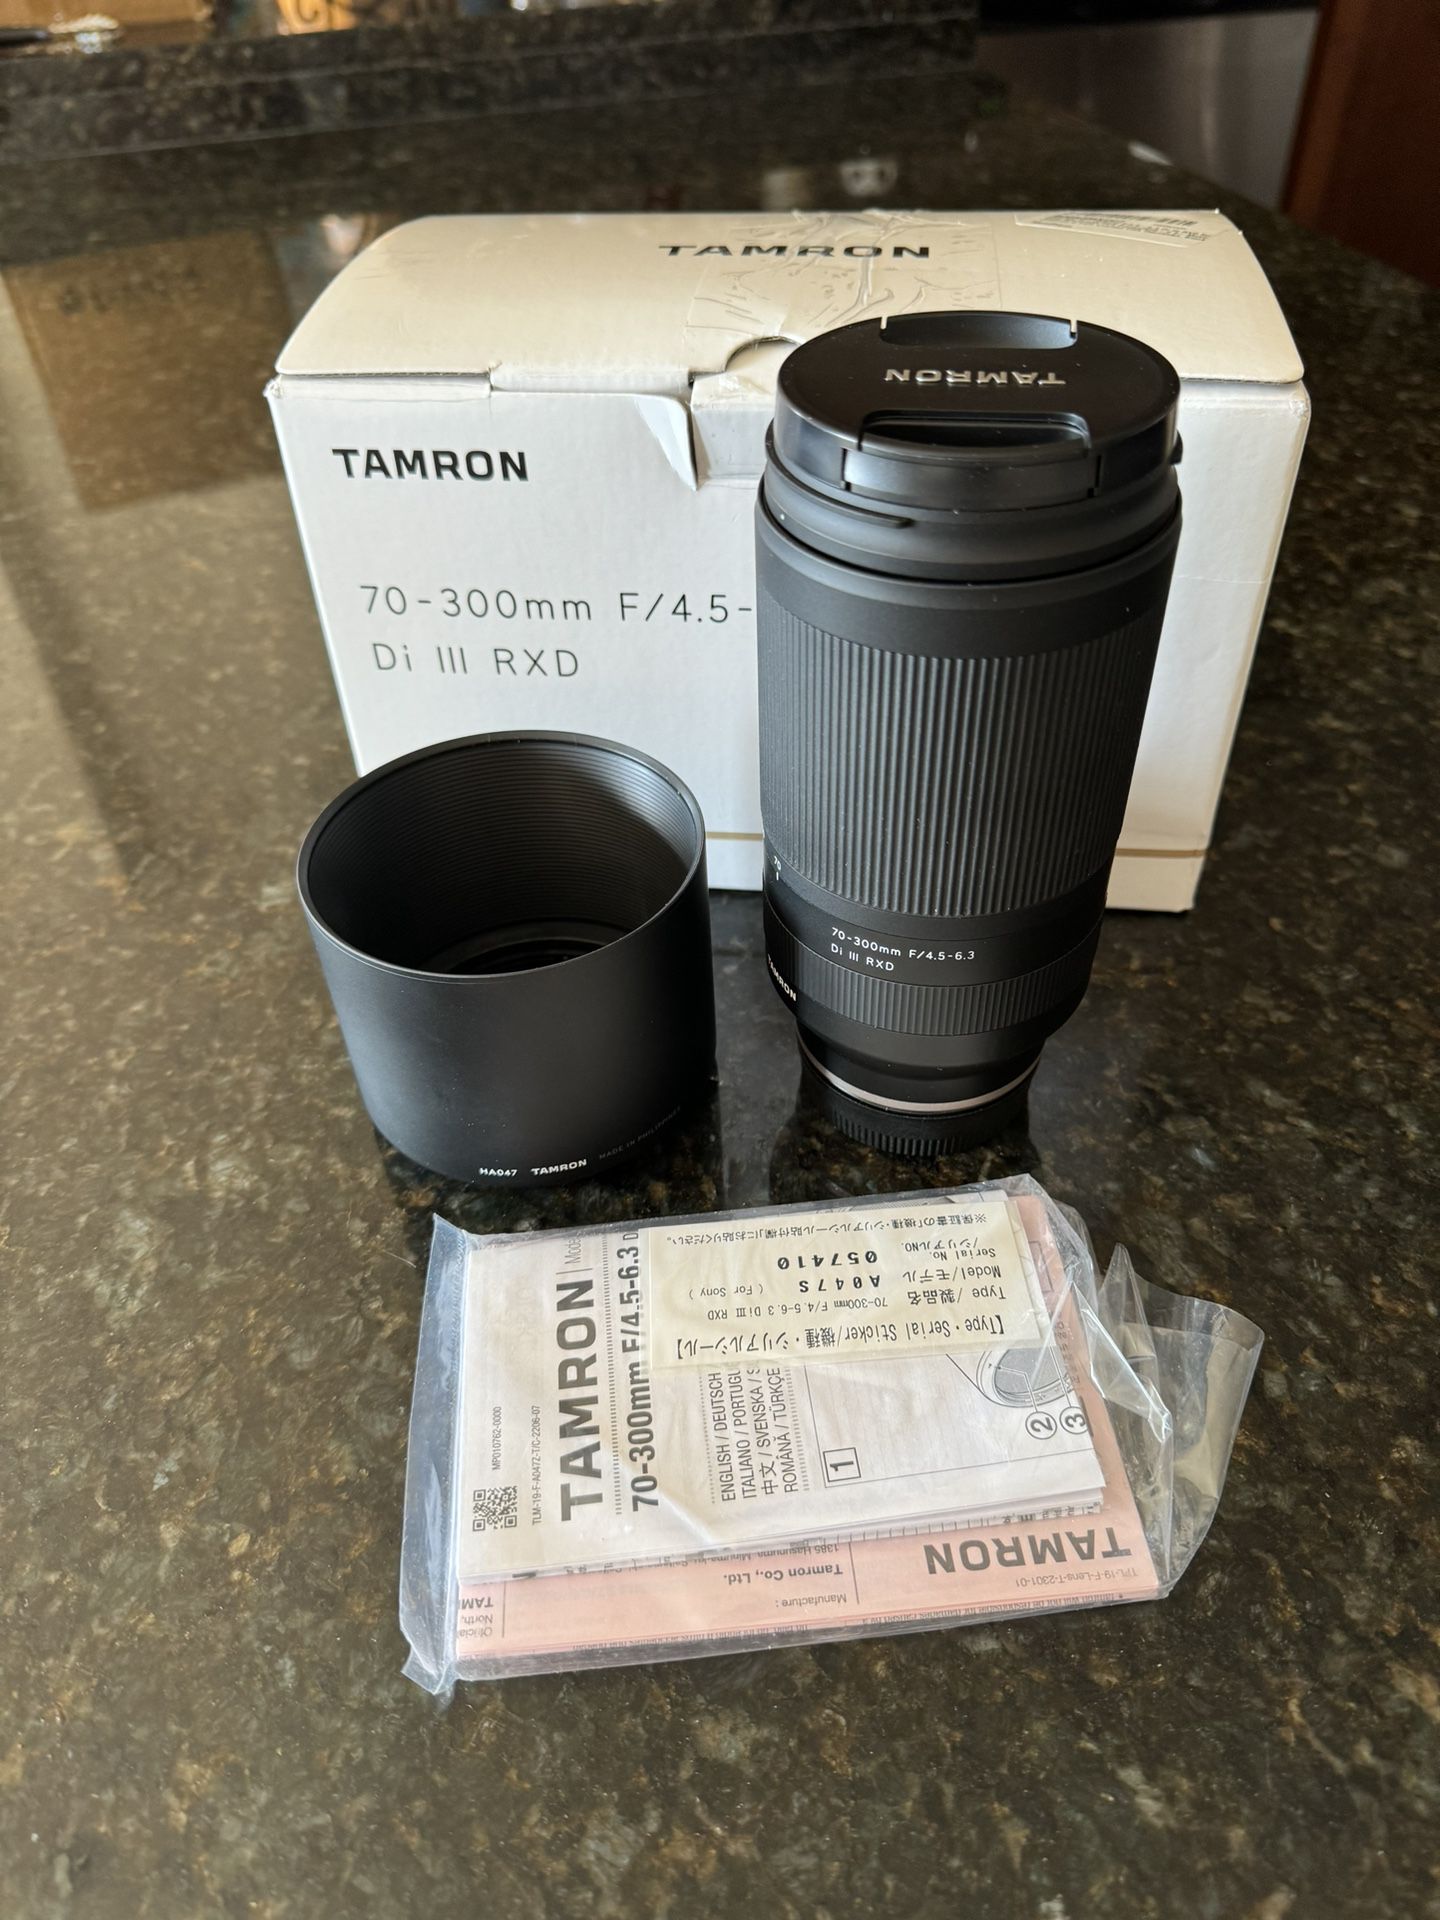 Tamron 70-300mm f/4.5-6.3 Di III RXD Lens for Sony E mount